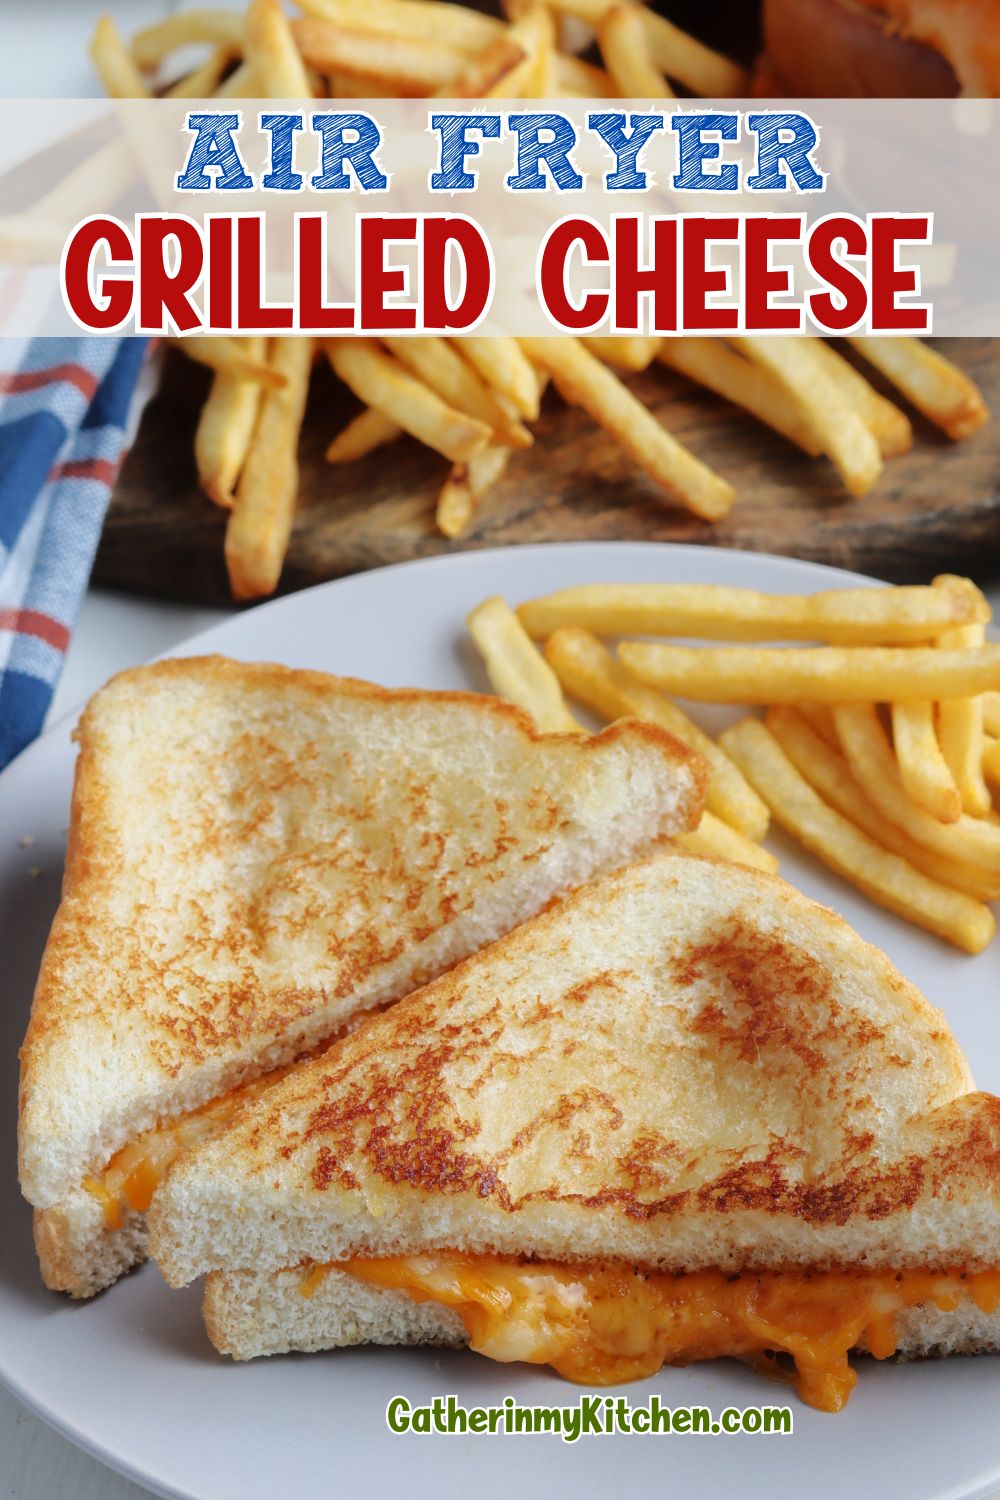 Pin image: plate with a cut in half grilled cheese sandwich with the words "Air Fryer Grilled Cheese" overlaid on top.